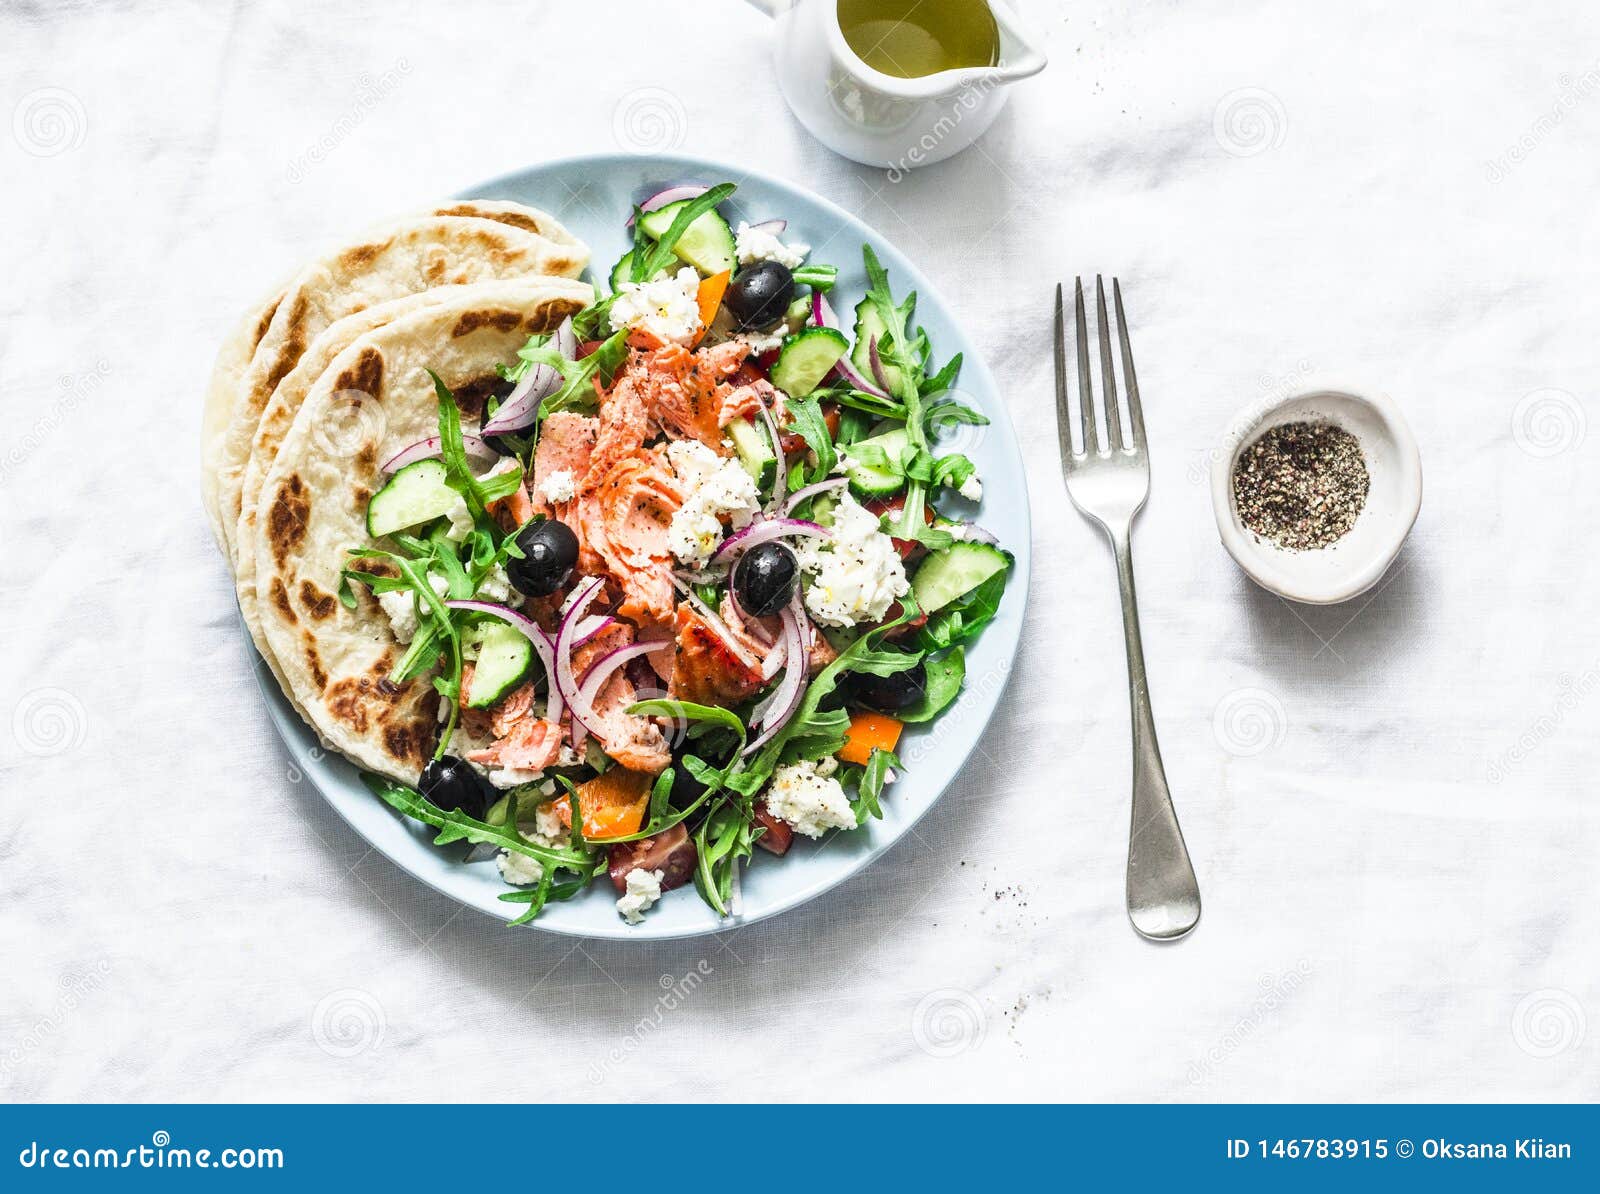 greek salad with baked salmon on a light background, top view. healthy mediterranean diet food